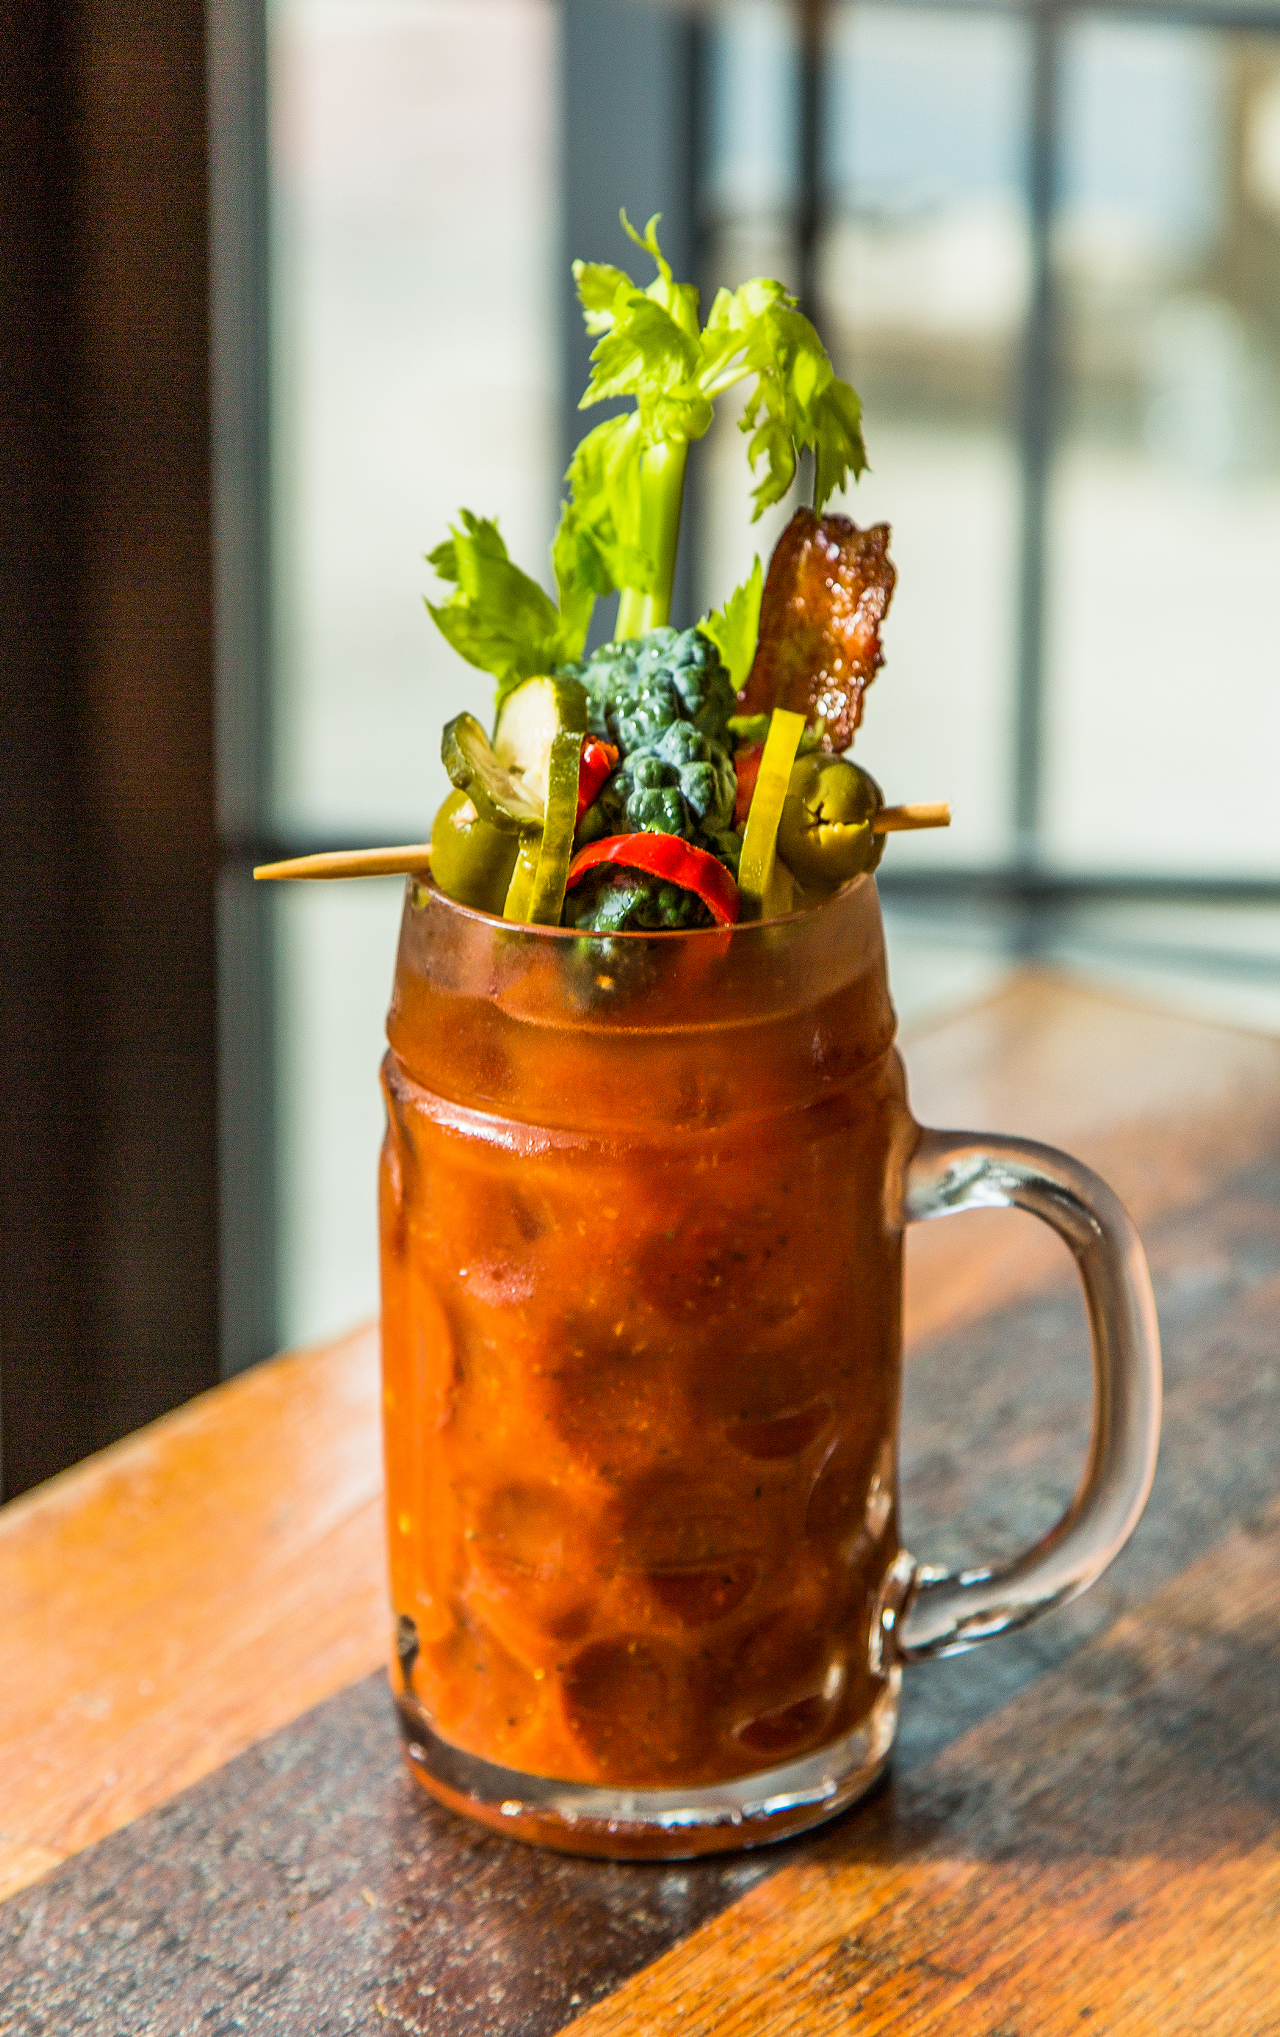 The Eagle // This bloody mary is made with Tito’s vodka, a bit of Guinness stout and housemade mix. The garnish feels pleasantly light in comparison to other big bloodies, with kale, a slice of candied bacon, olives, pickles and peppers. 1342 Vine St., Over-the-Rhine, theeagleotr.com.